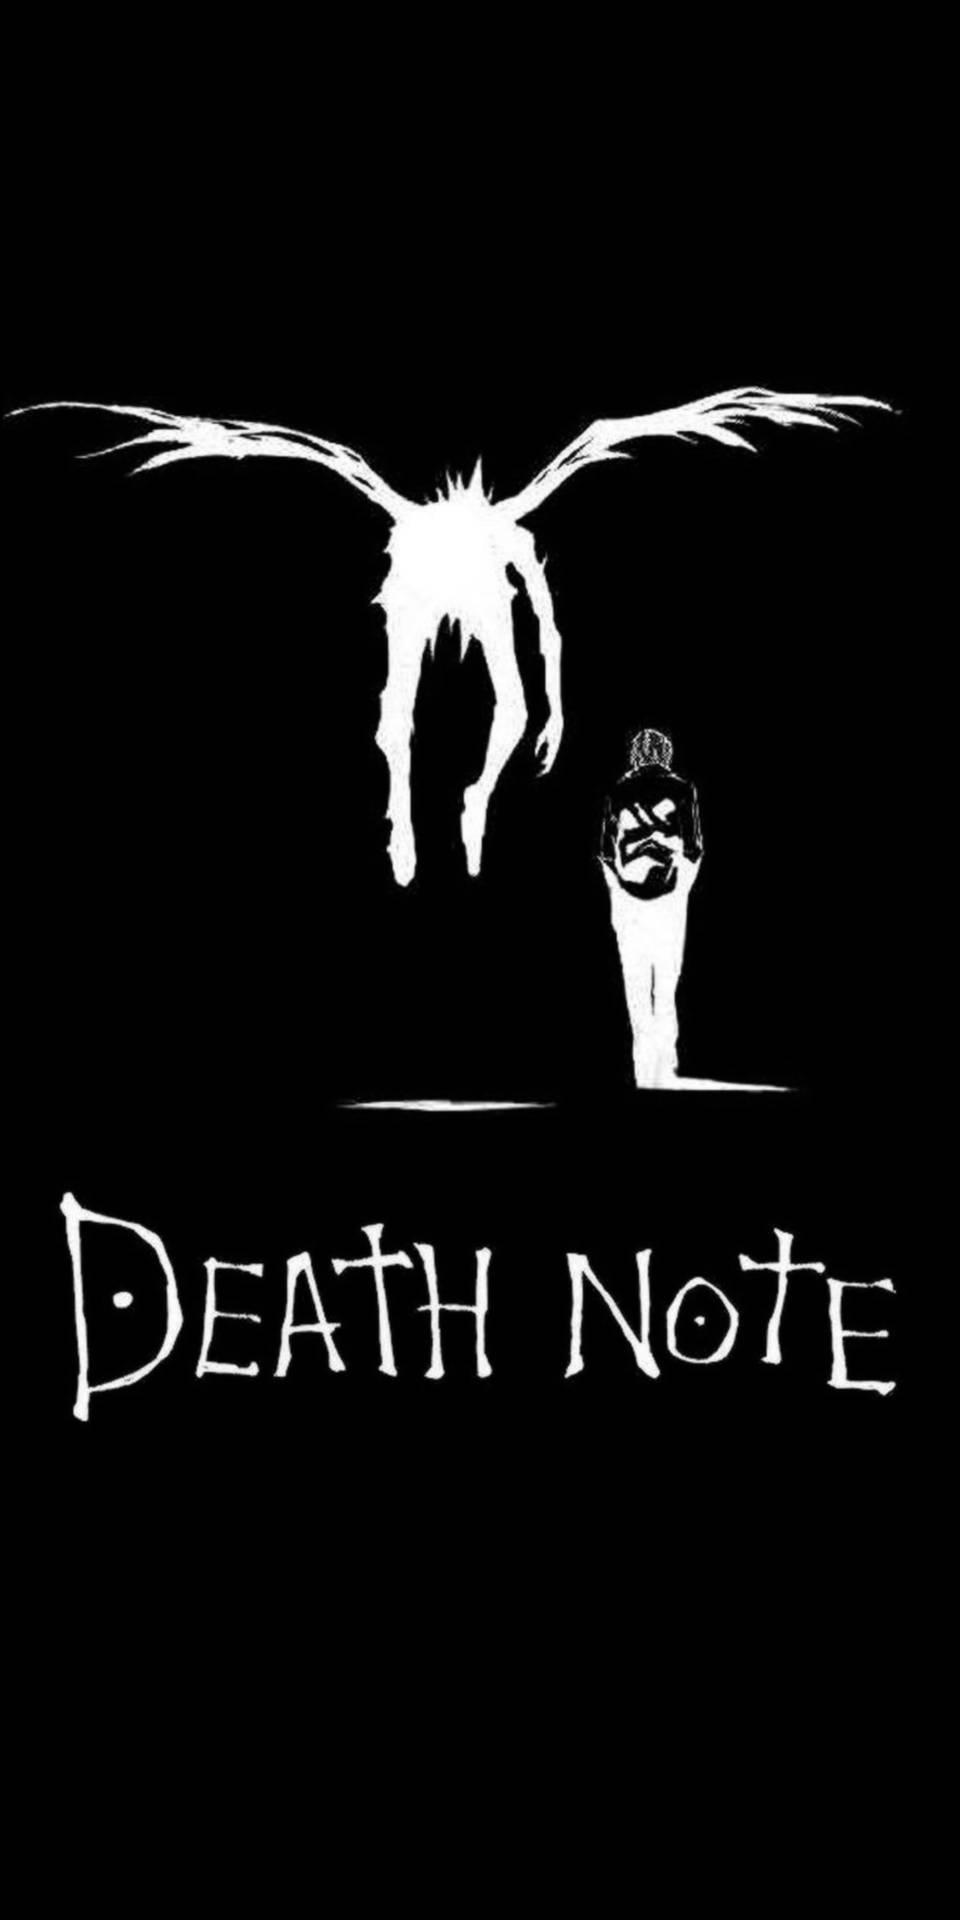 Free Death Note Phone Wallpaper Downloads, [100+] Death Note Phone  Wallpapers for FREE 